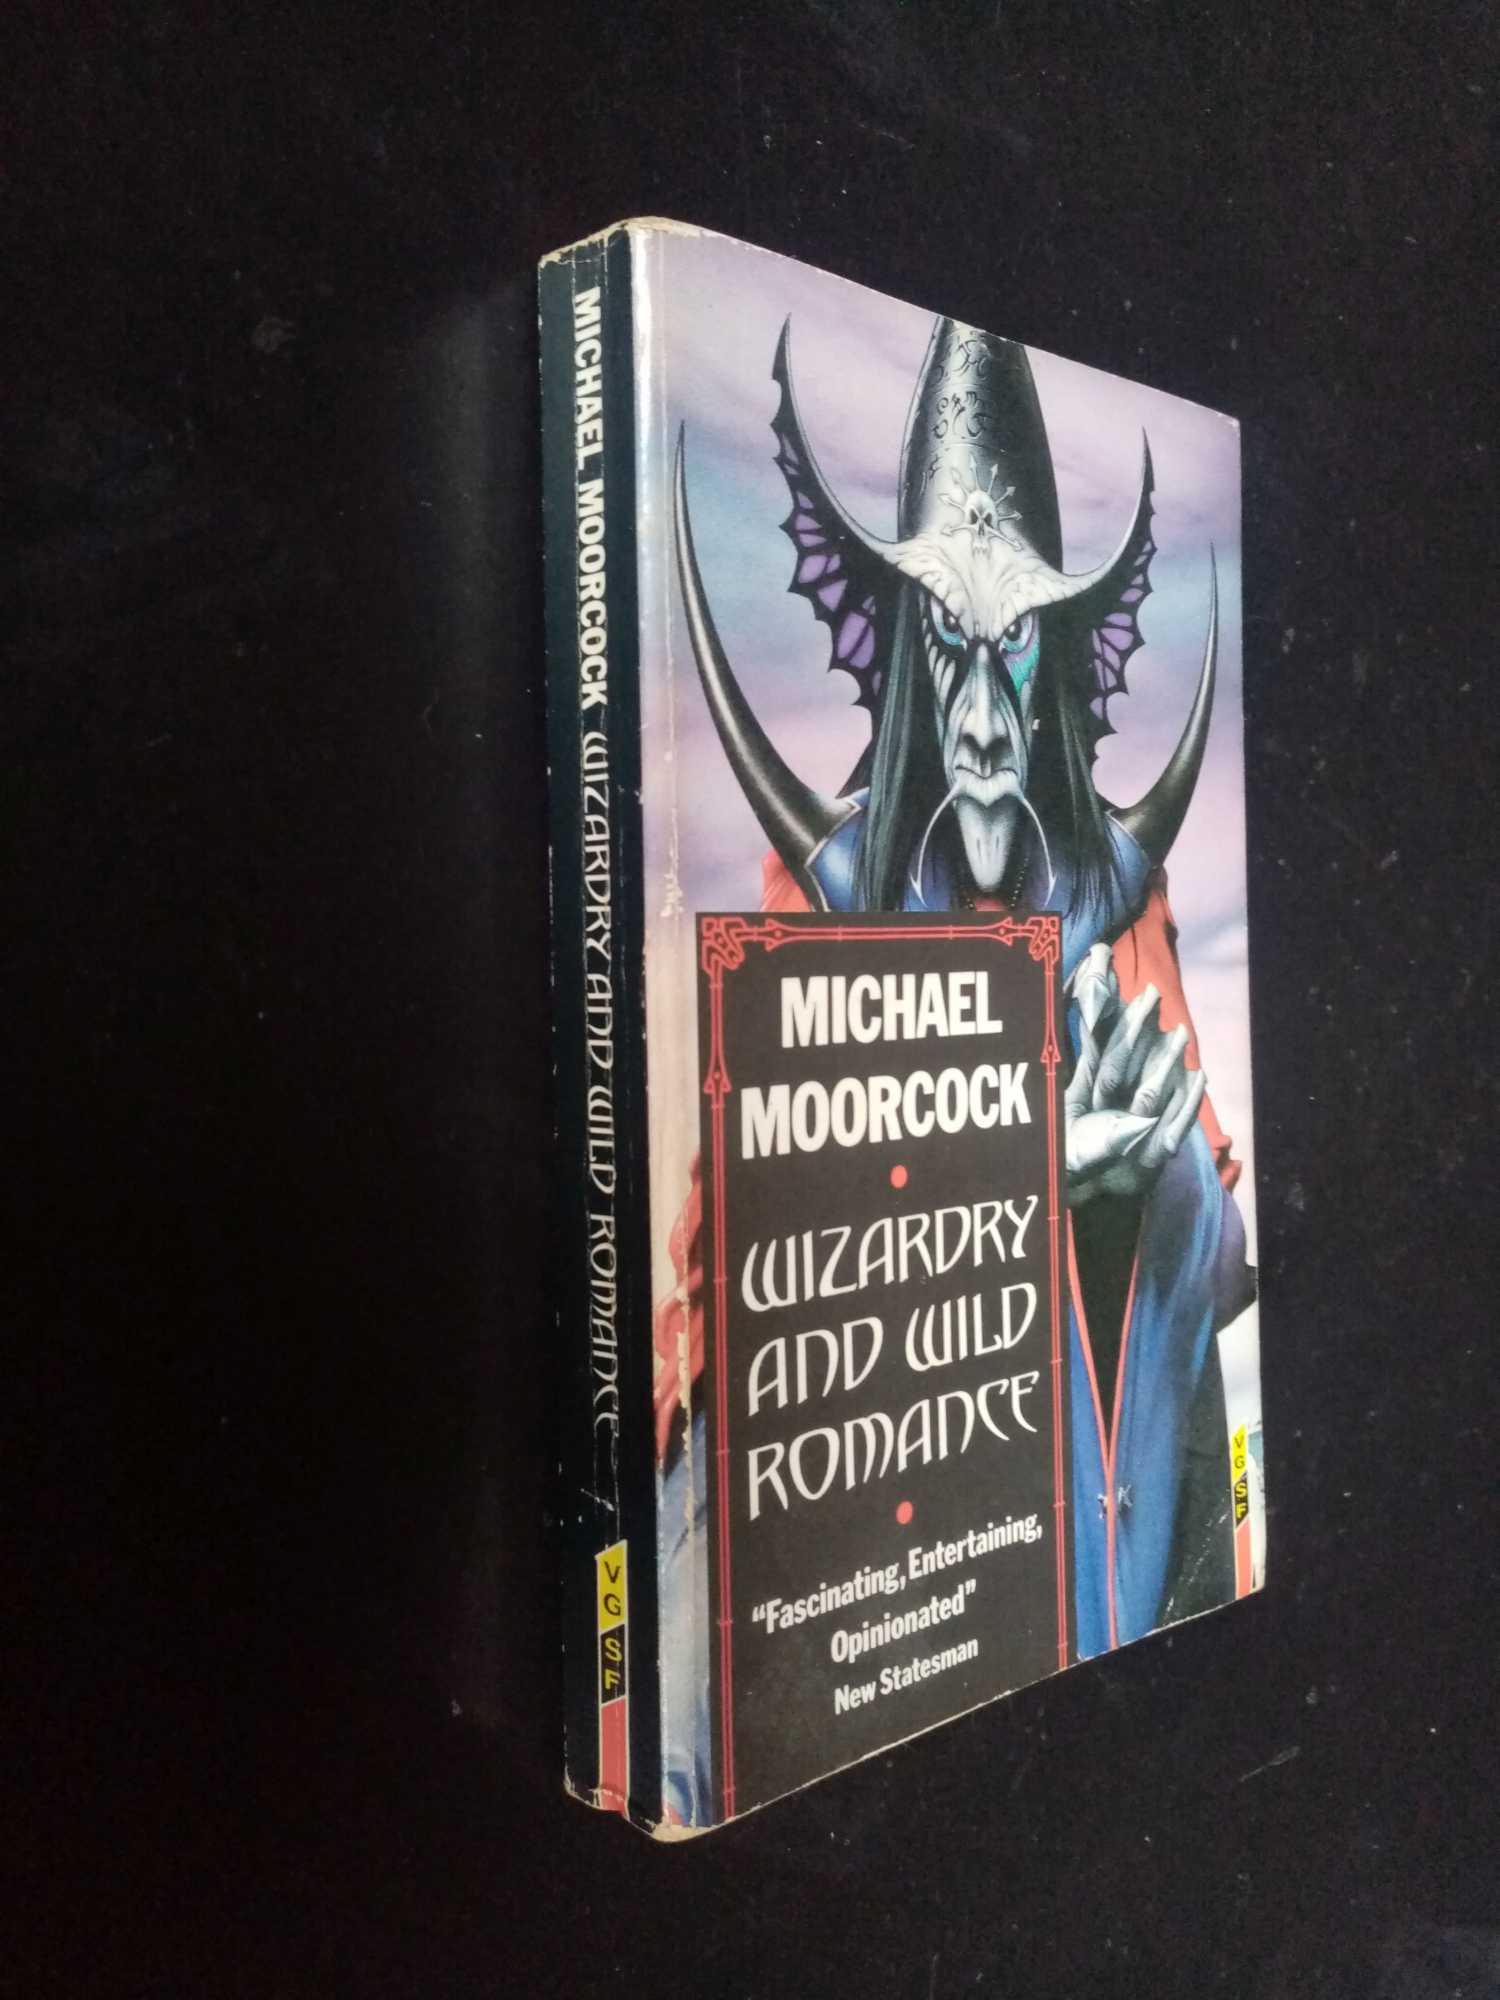 Michael Moorcock - Wizardry and Wild Romance